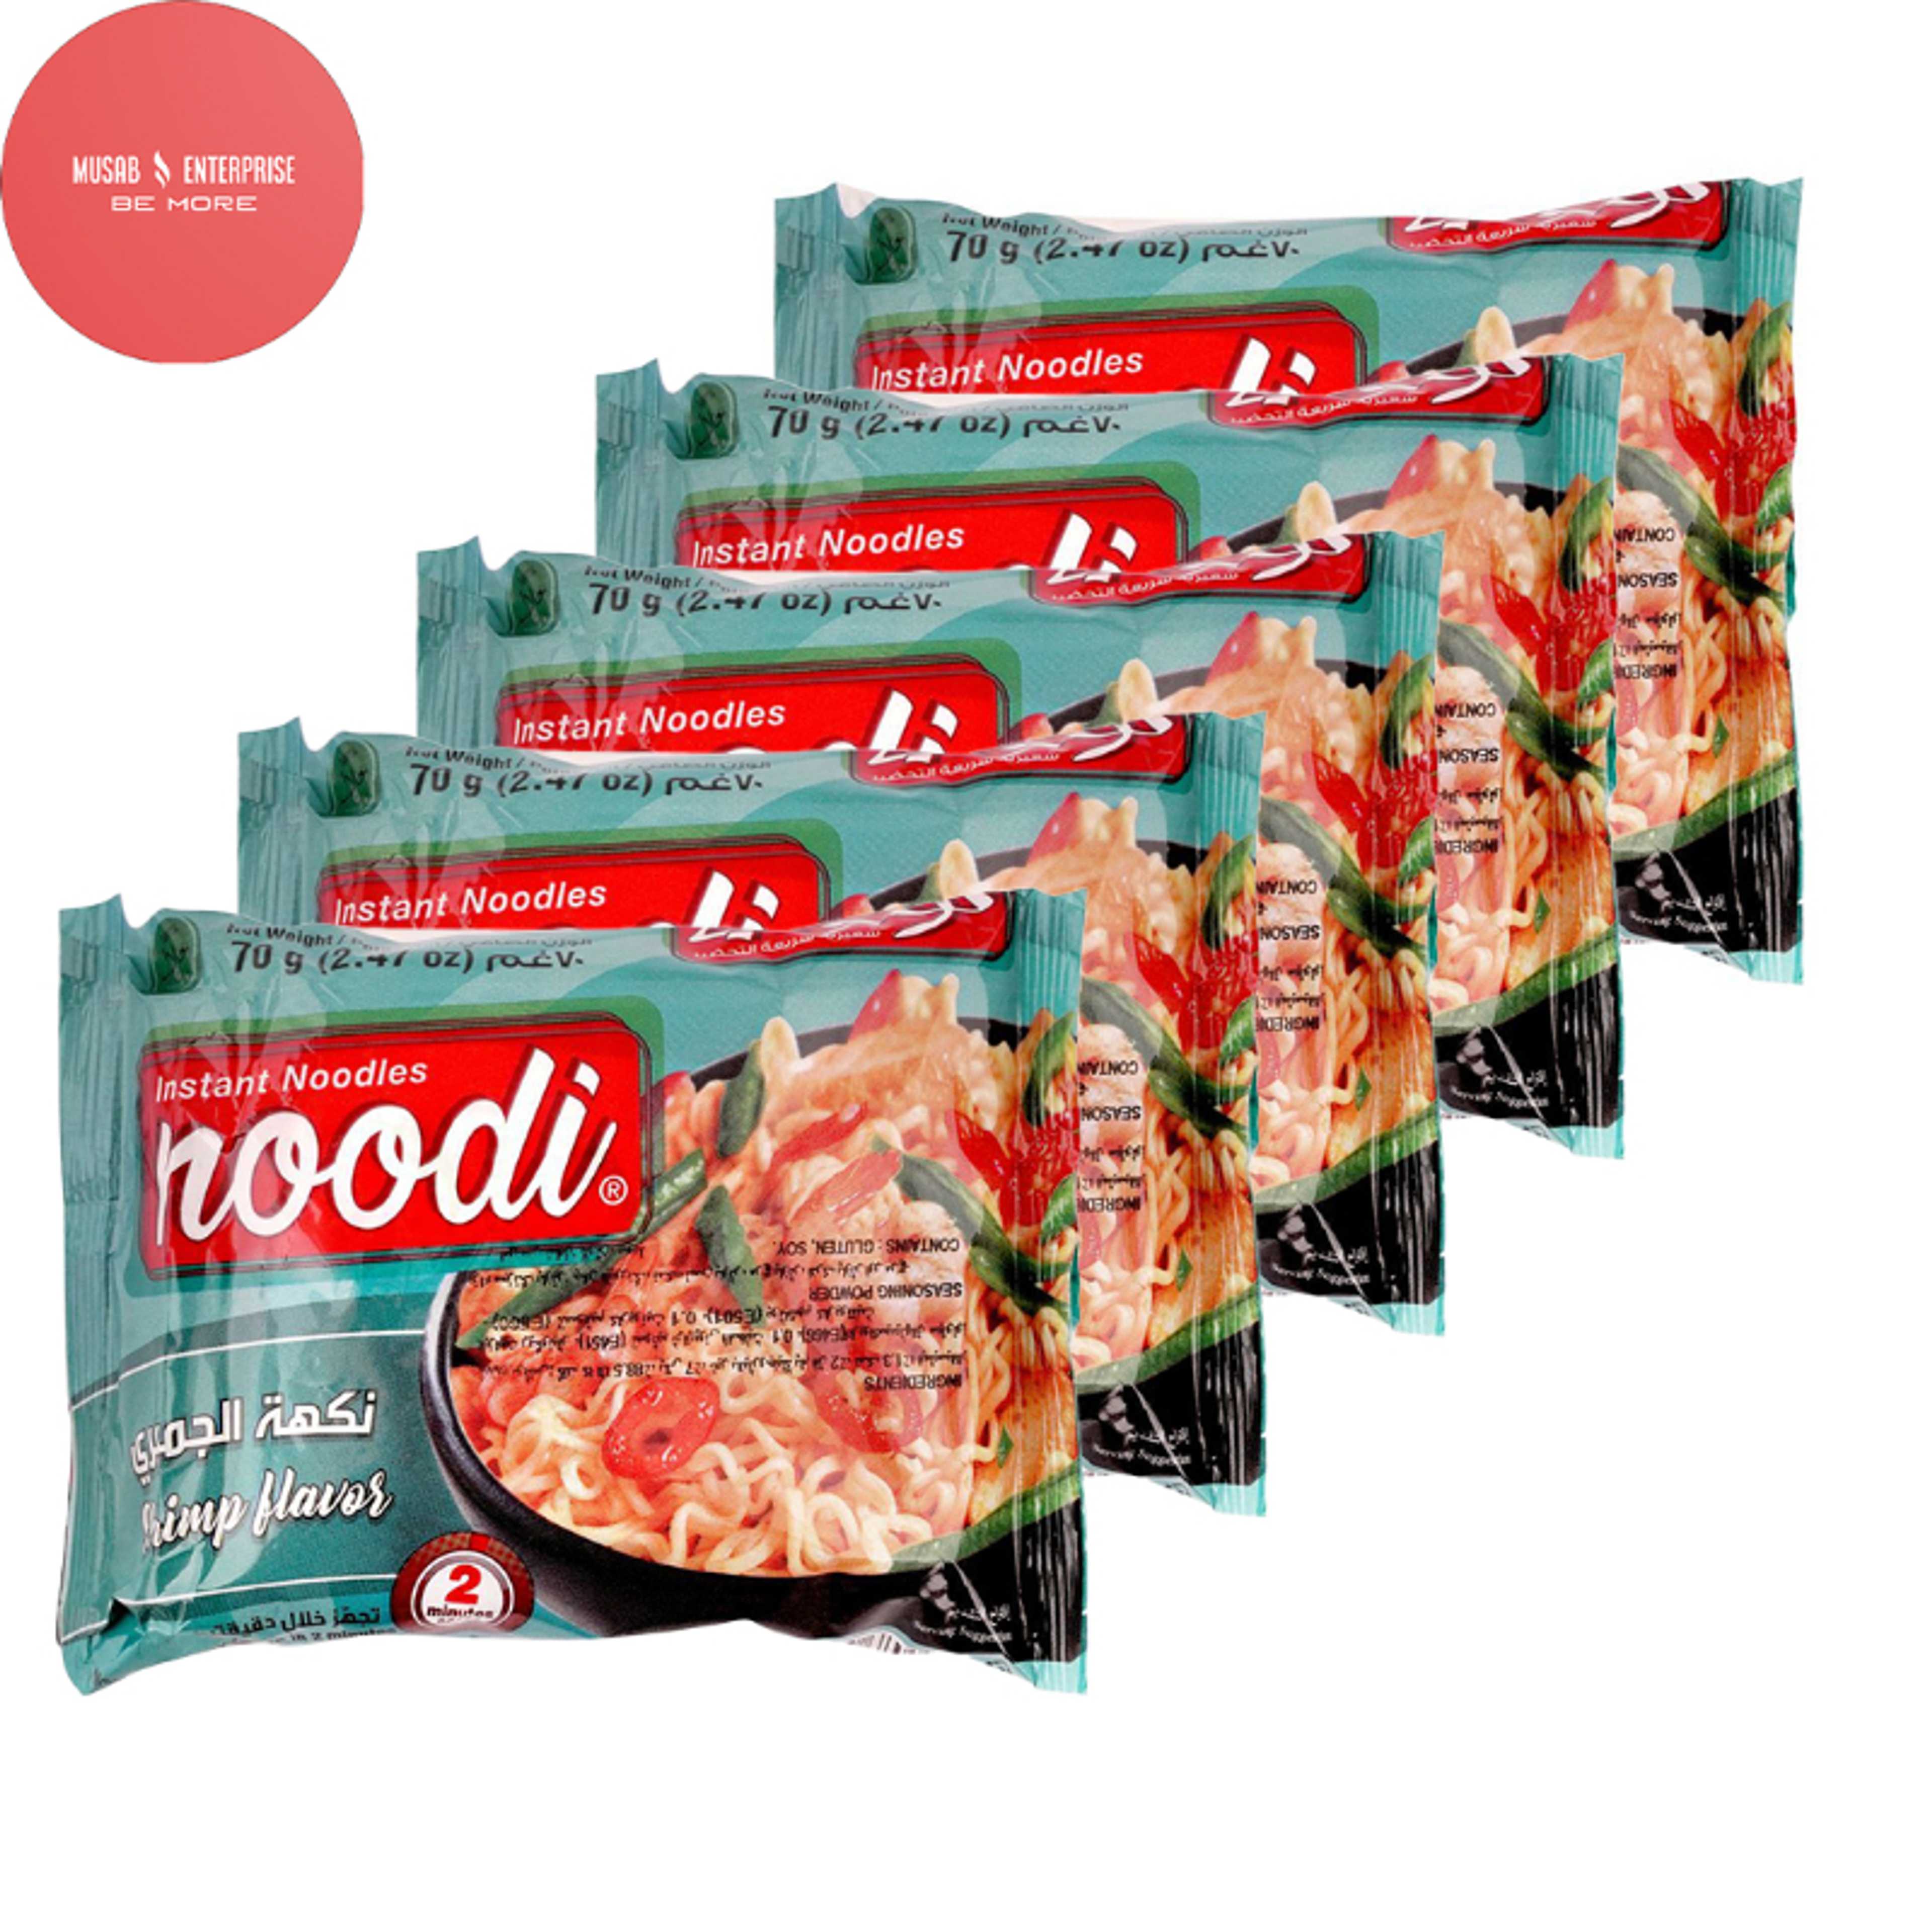 Noodi Shrimp Flavor Instant Noodles, 70g, Pack of 5 Noodles (Available in 9 Exciting Flavors)